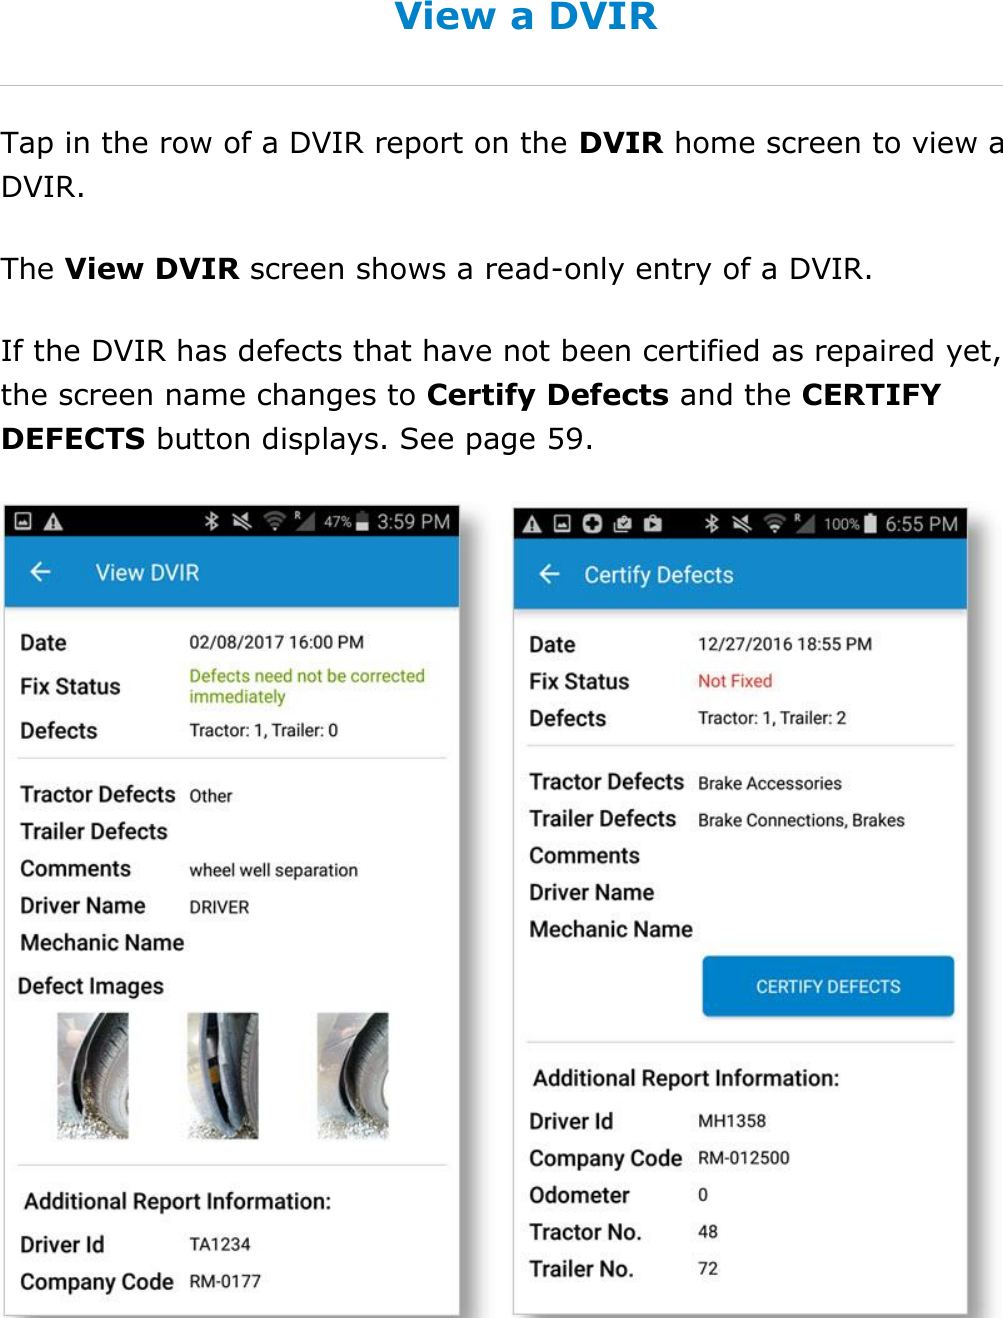 Complete a DVIR DriverConnect User Guide  58 © 2016-2017, Rand McNally, Inc. View a DVIR Tap in the row of a DVIR report on the DVIR home screen to view a DVIR. The View DVIR screen shows a read-only entry of a DVIR. If the DVIR has defects that have not been certified as repaired yet, the screen name changes to Certify Defects and the CERTIFY DEFECTS button displays. See page 59.    